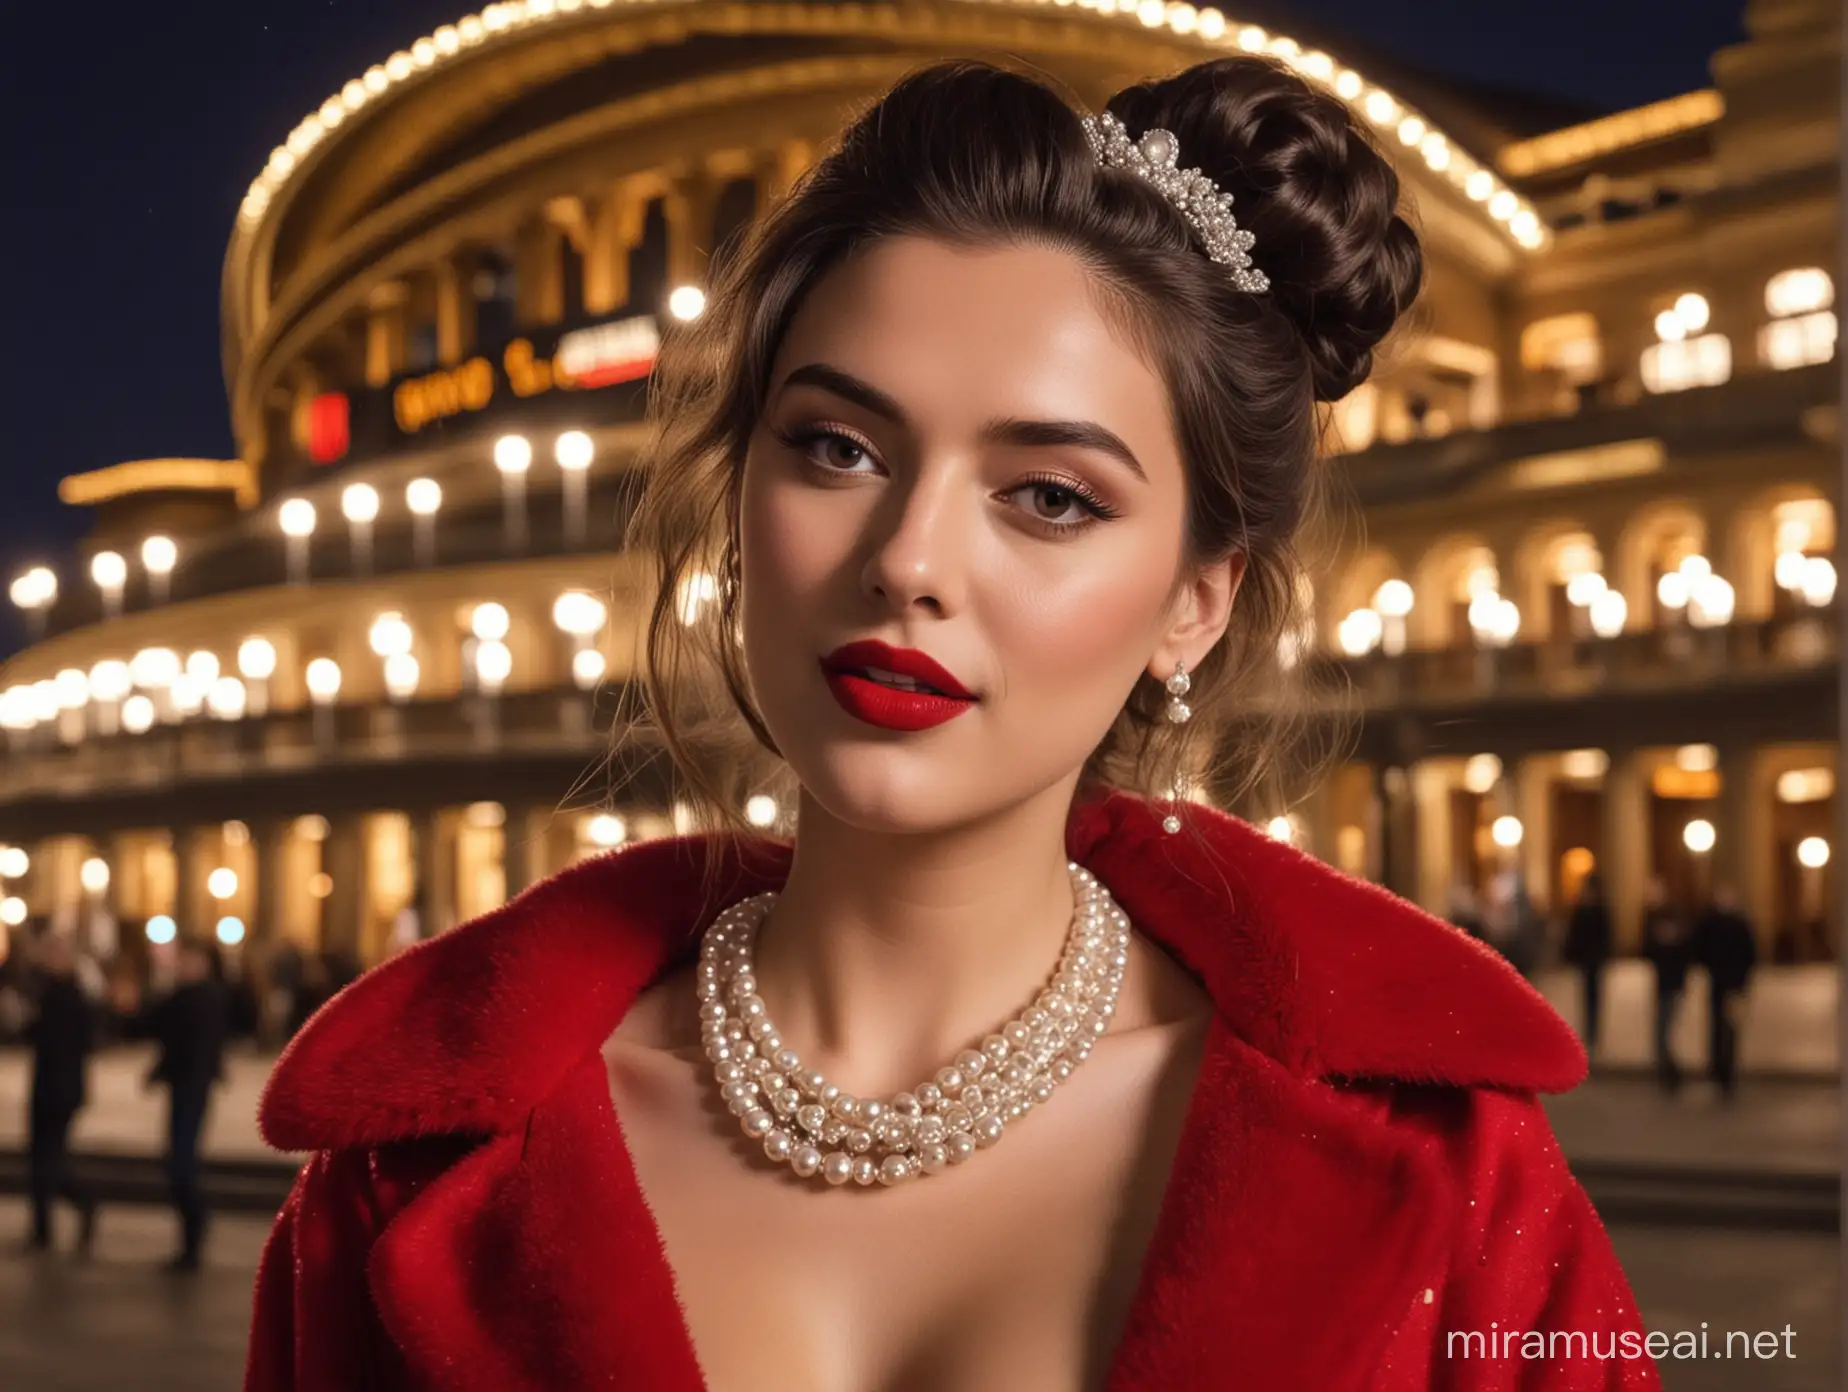 A party girl in a pearl necklace wearing a red lipstick and elegant coat runs out of the opera house, she lets her hair down from her bun and is going to a night party